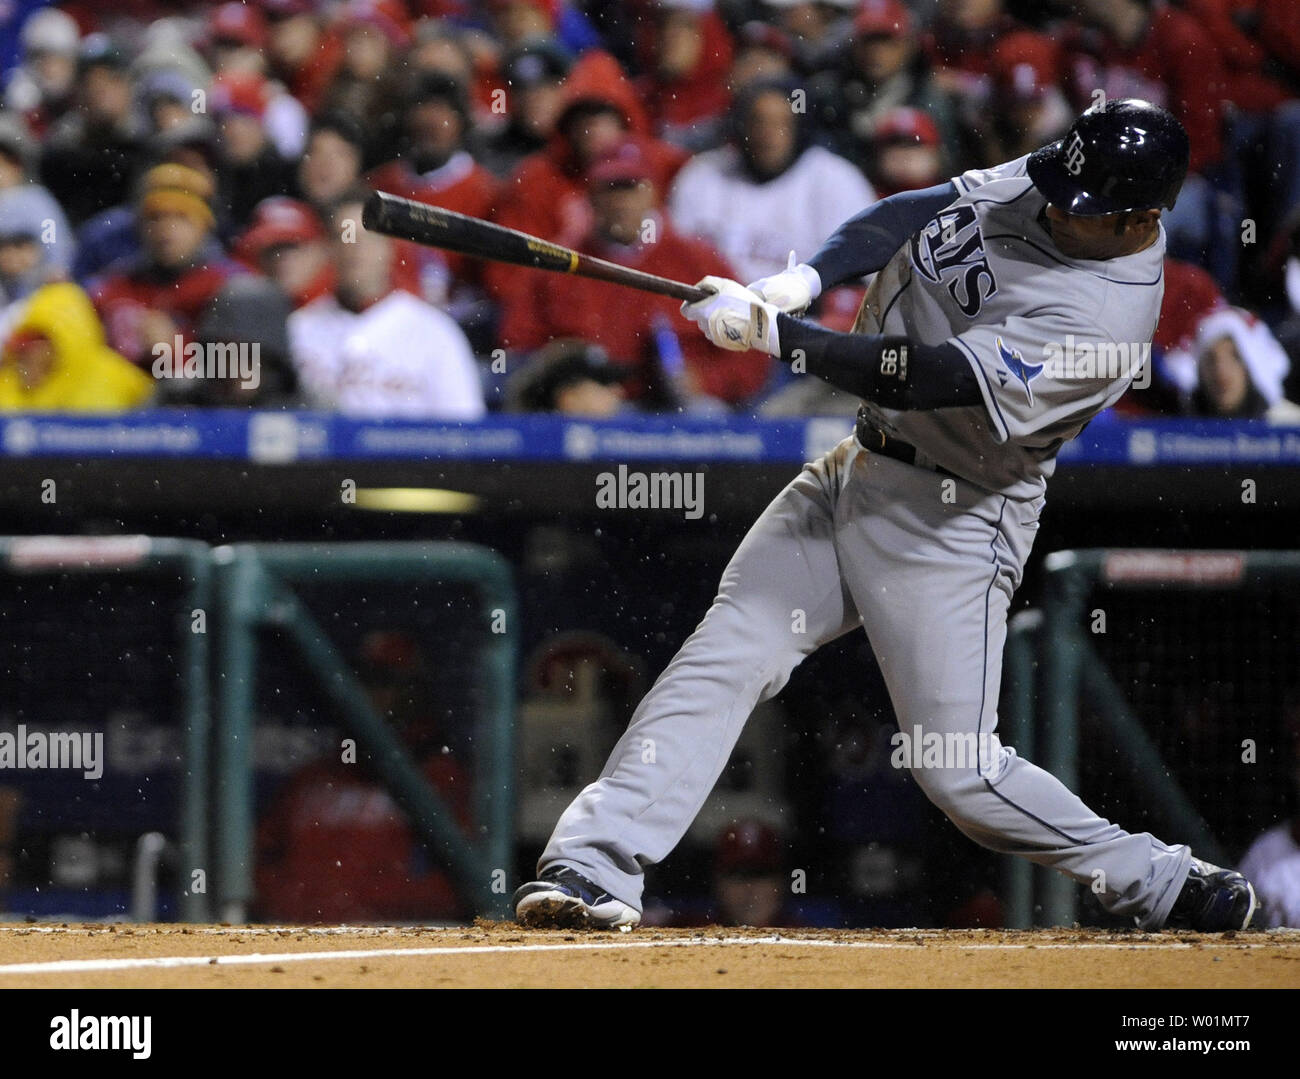 Tampa Bay Rays first baseman Carlos Pena connects for a double against the Philadelphia Phillies during the fourth inning of game 5 of the World Series at Citizens Bank Park in Philadelphia on October 27, 2008. (UPI Photo/Kevin Dietsch) Stock Photo